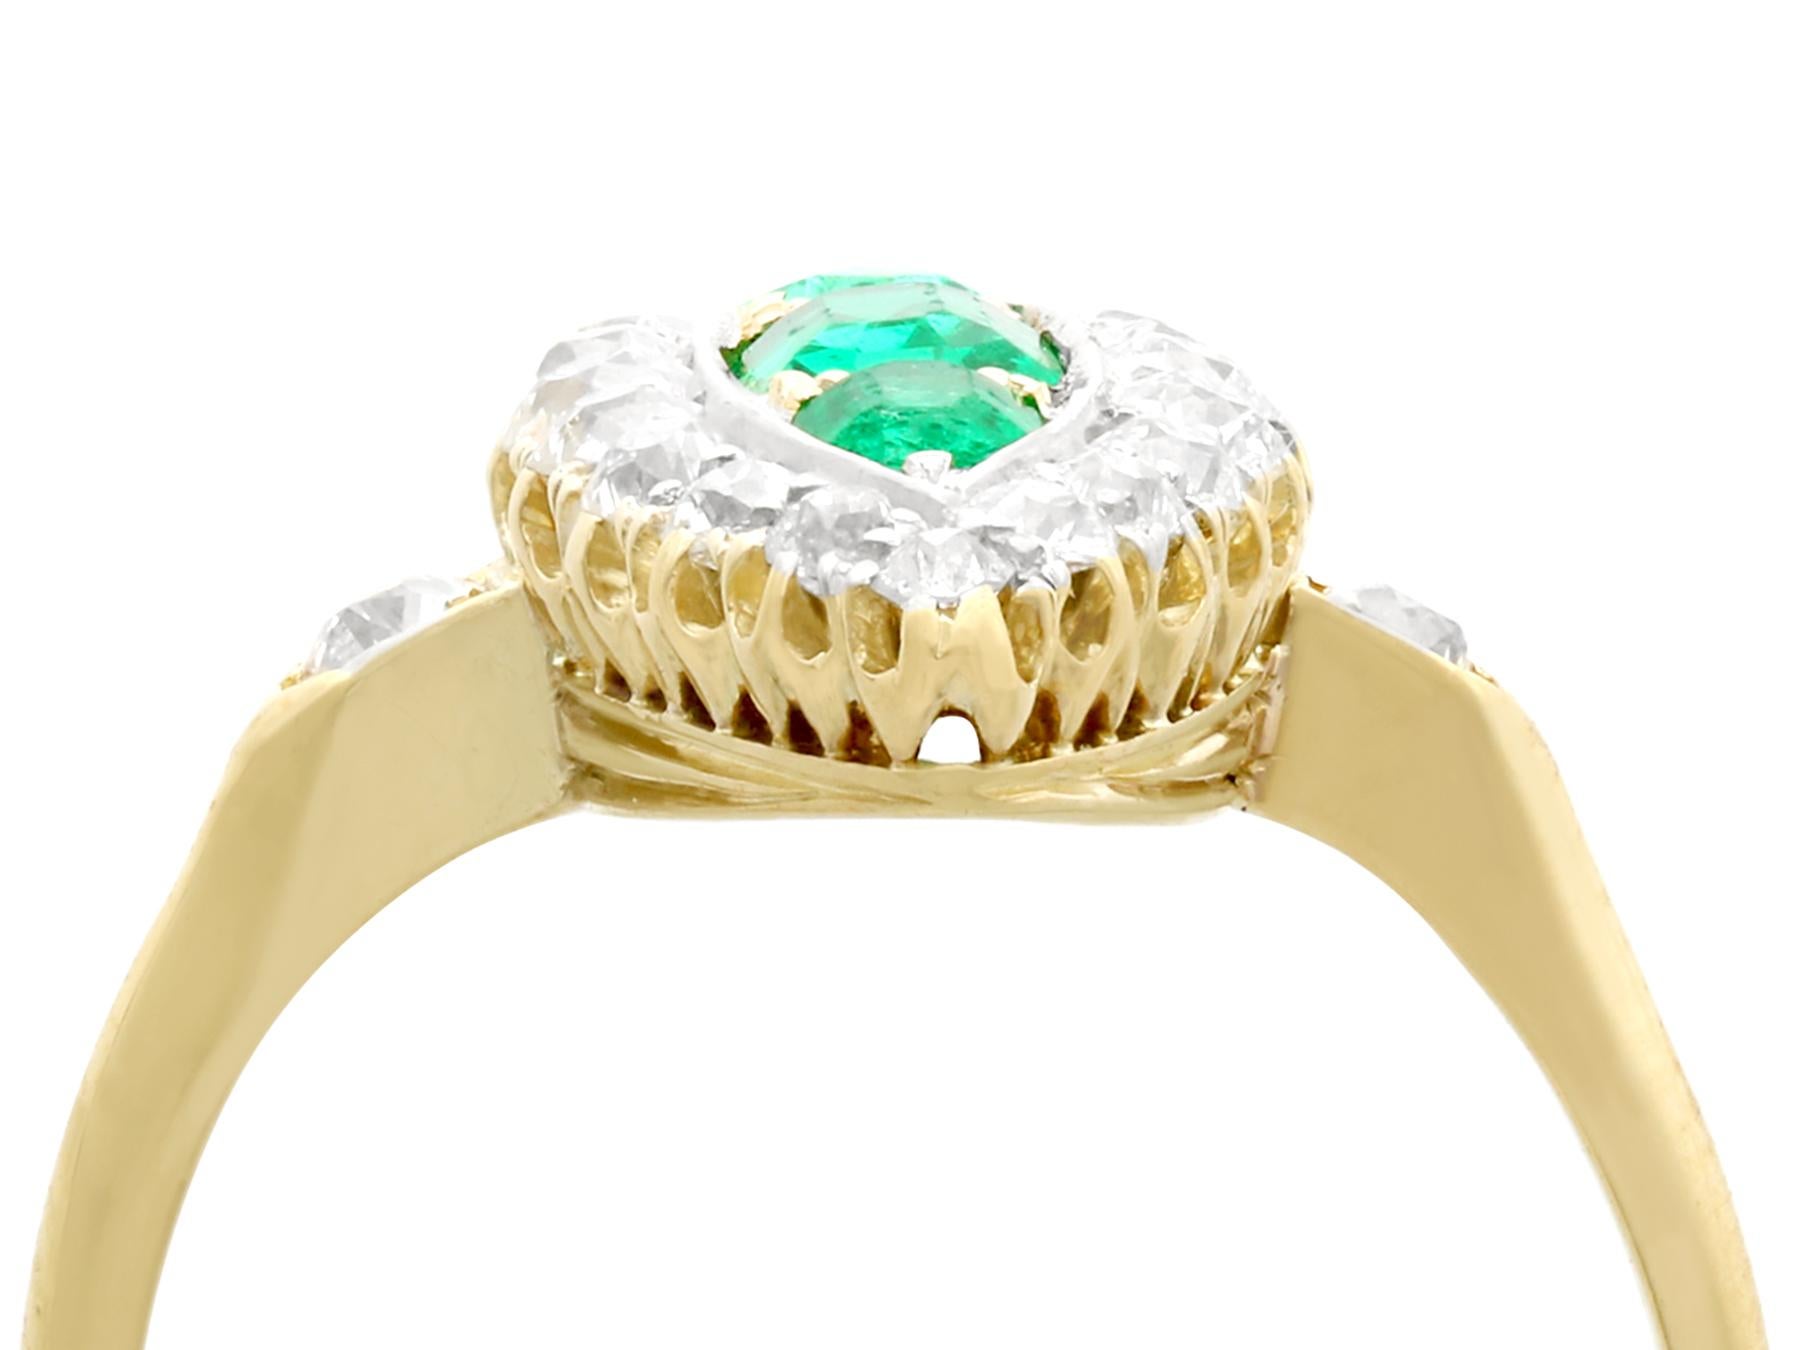 A fine and impressive antique 0.92 carat emerald and 1.38 carat diamond, 15 karat yellow gold marquise ring; part of our diverse antique jewelry collections.

This fine and impressive antique emerald cut emerald and diamond ring has been crafted in